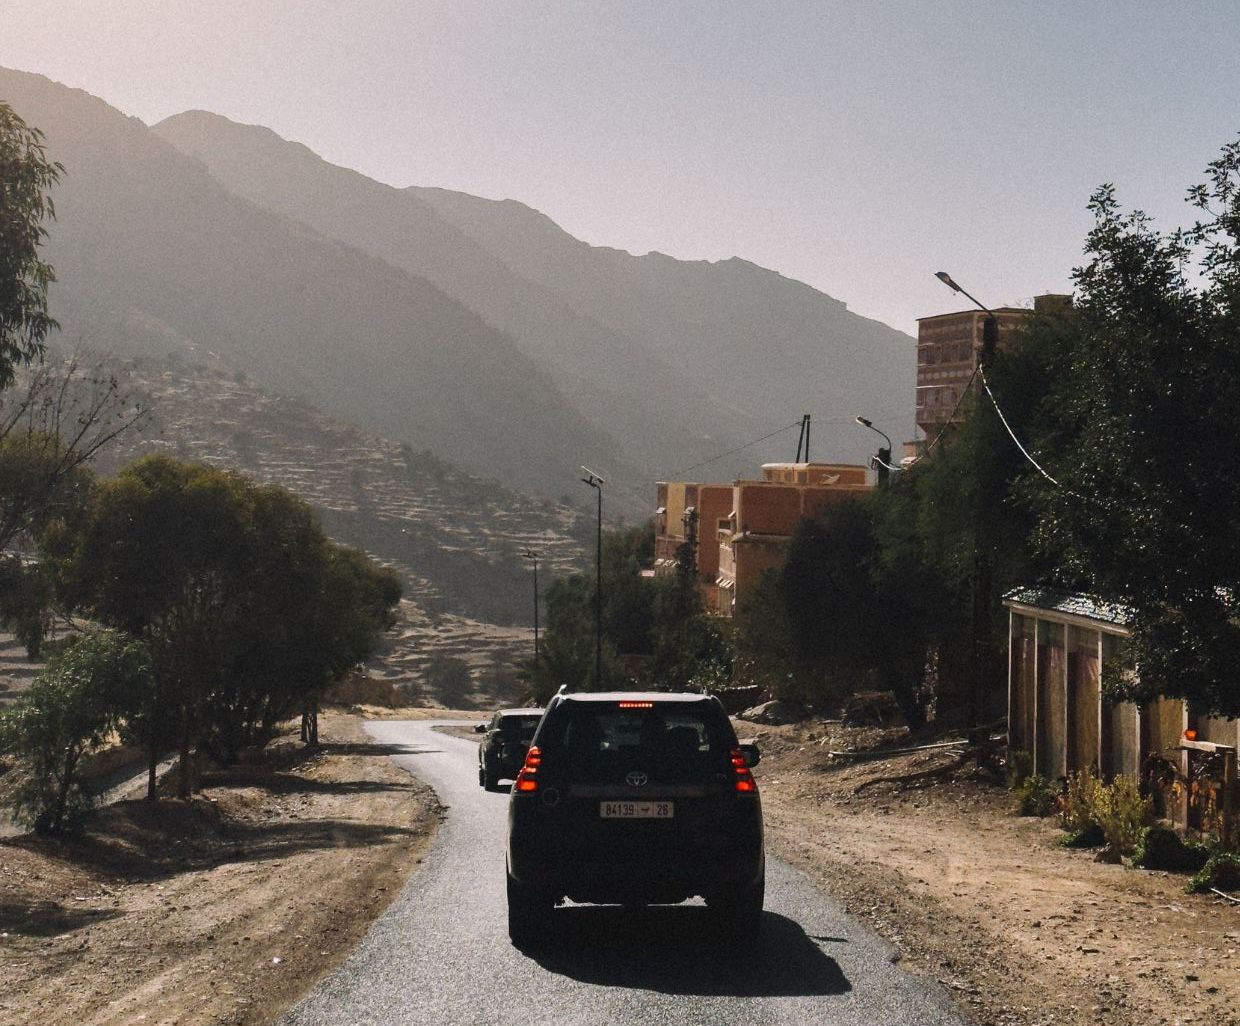 Two black cars driving through the mountains in Morocco